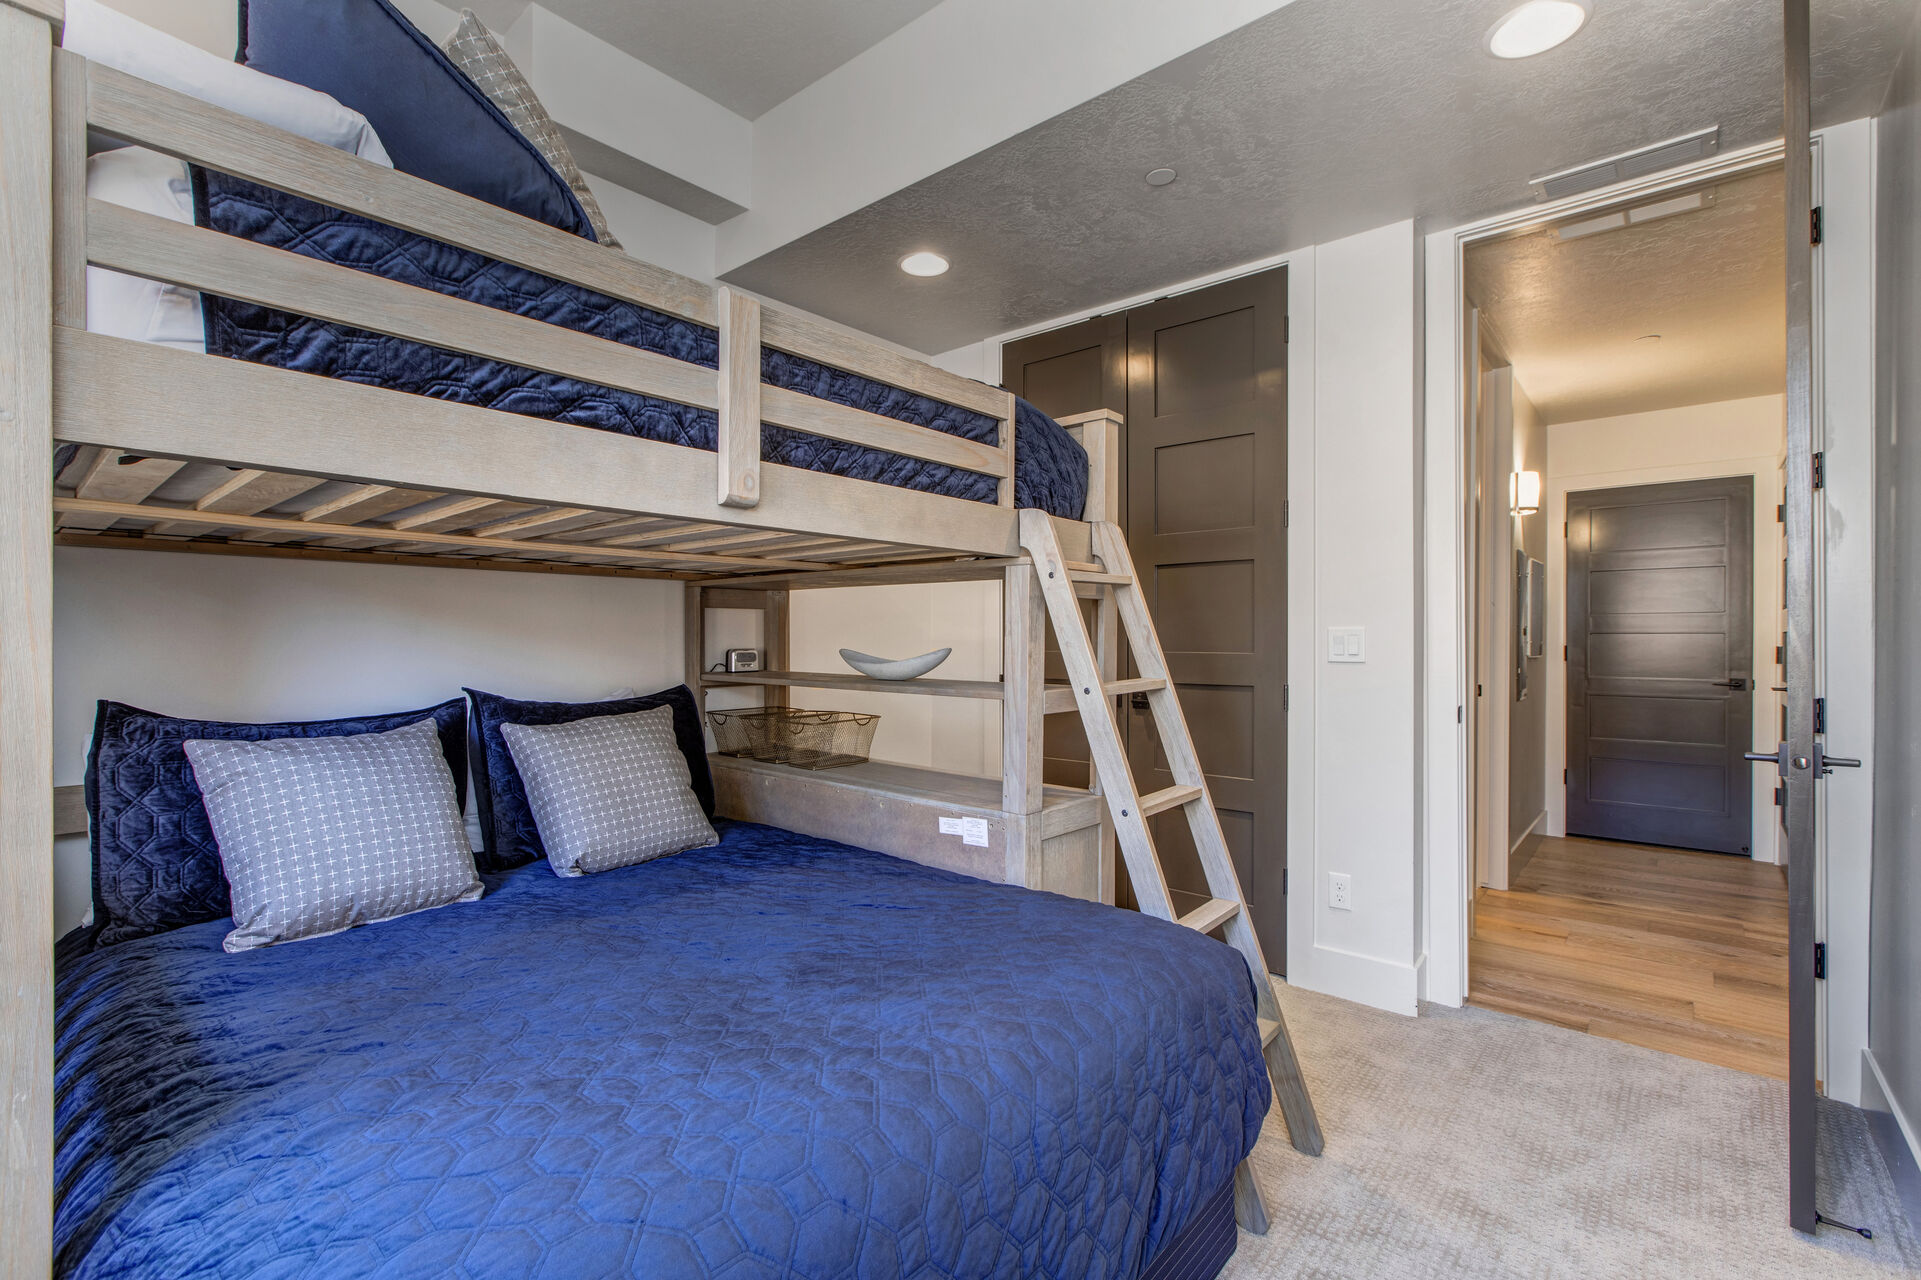 Lower level bedroom 3 bunk room with full over queen bunk beds and full bath access